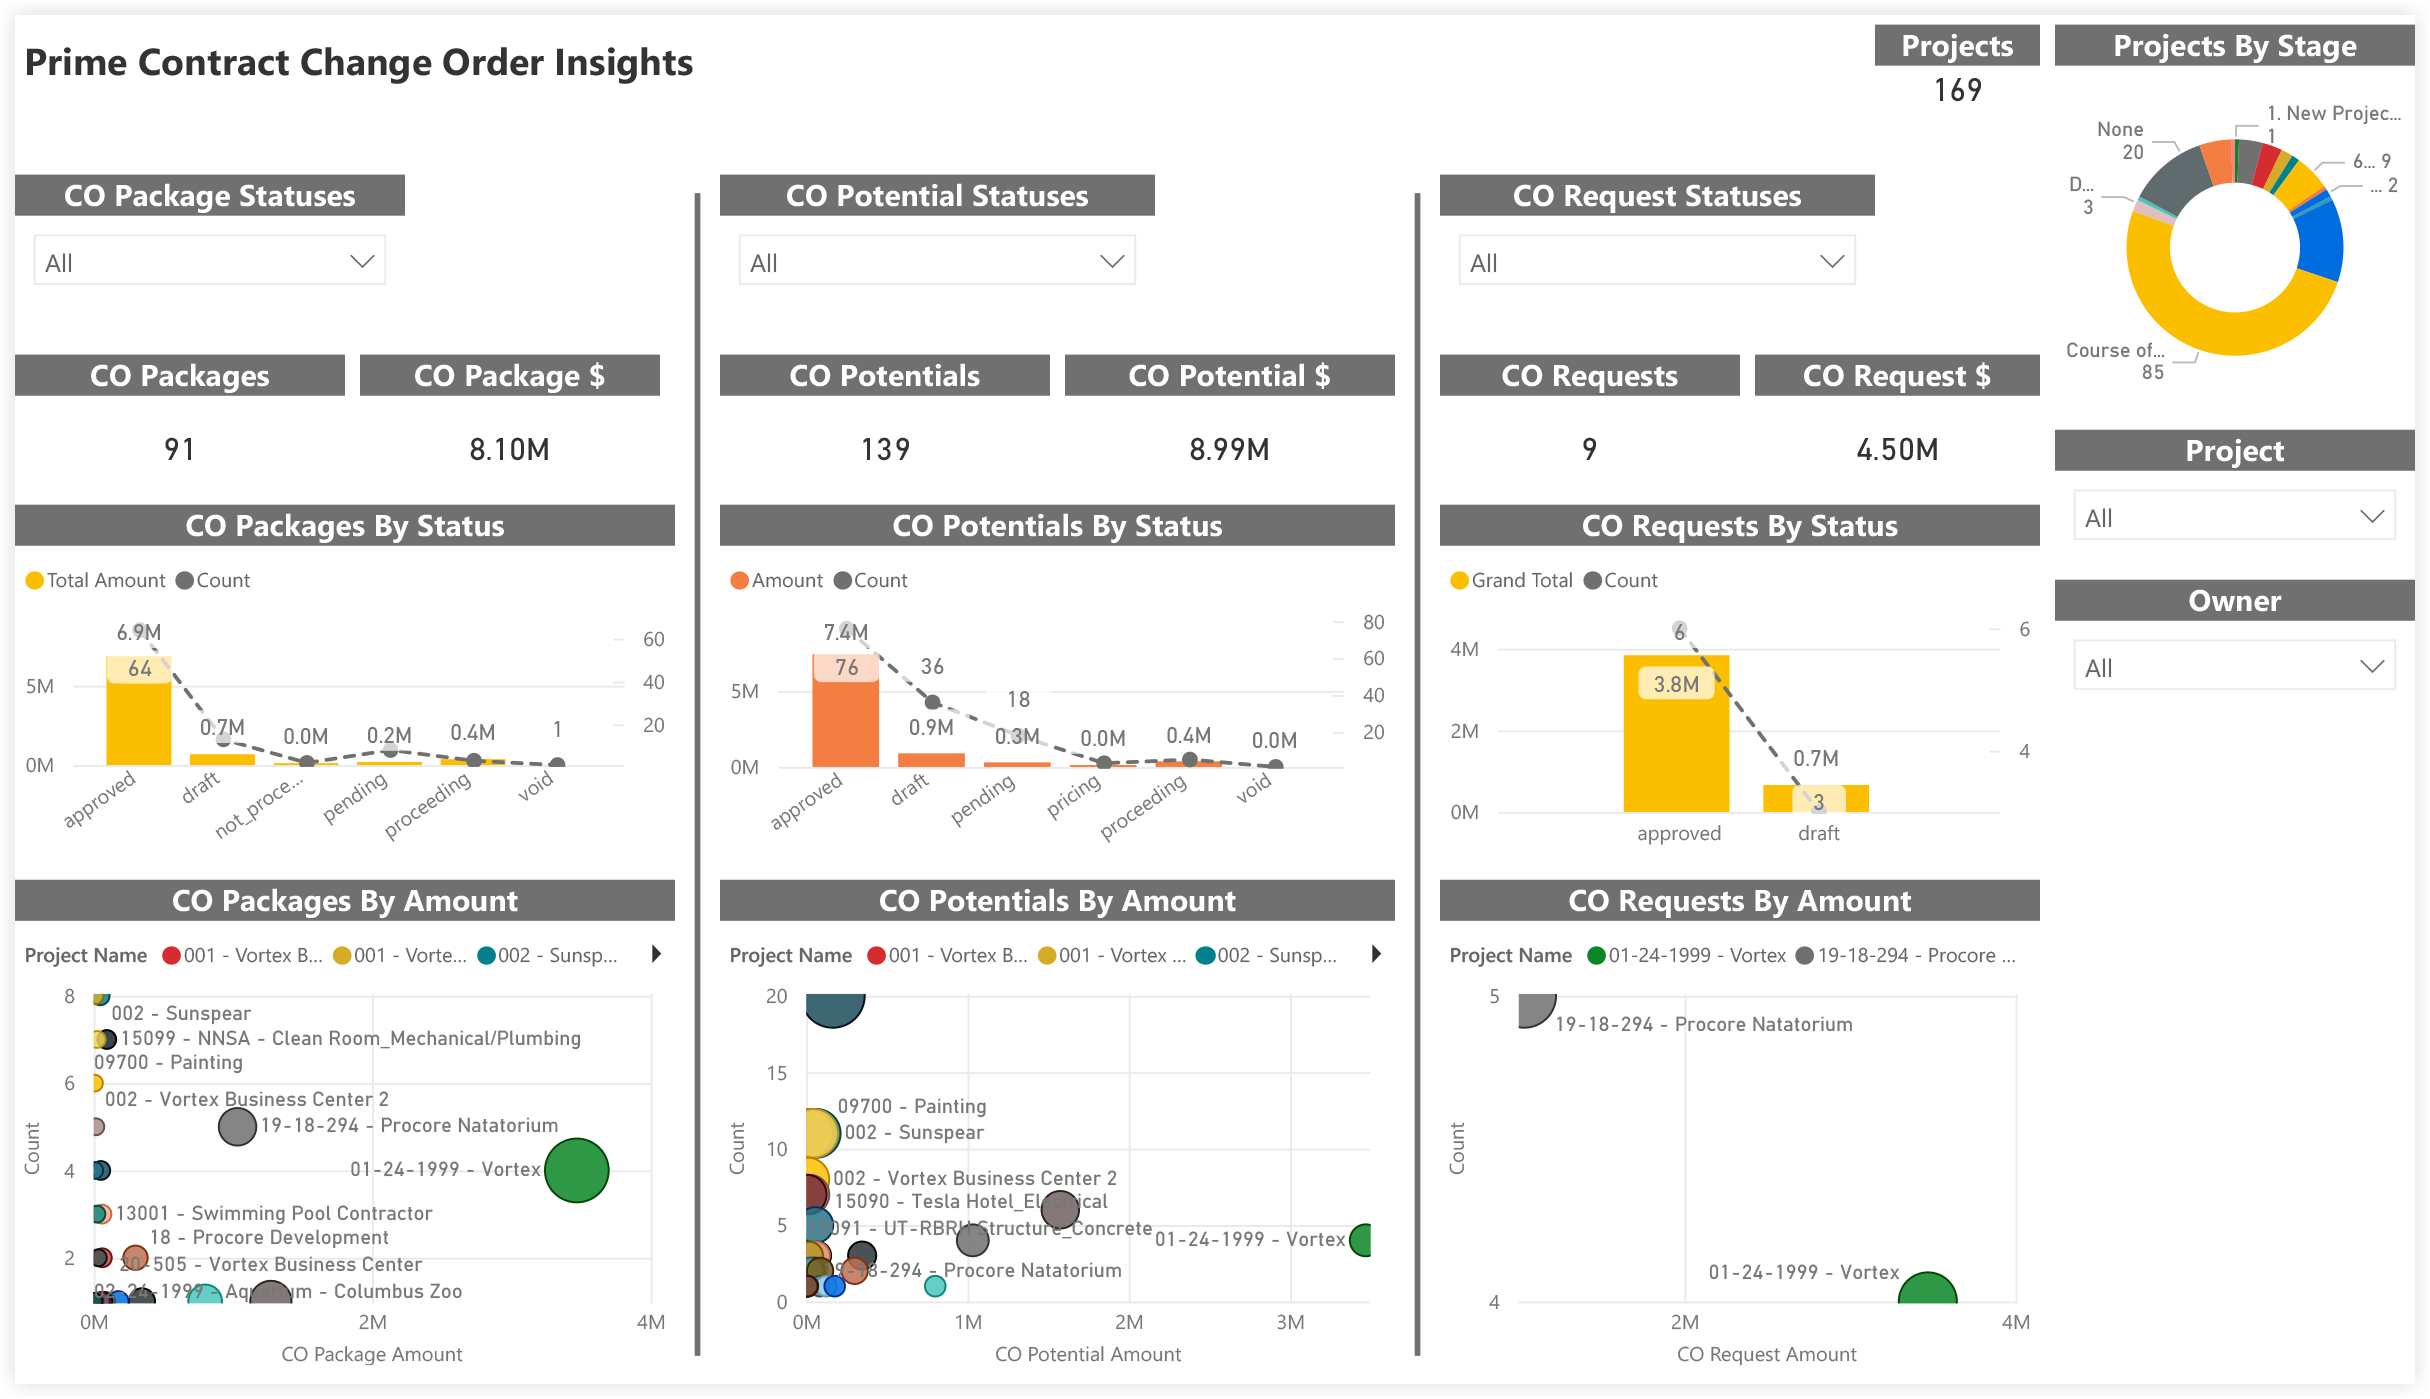 procore-analytics-financials-prime-contract-change-order-insights.png